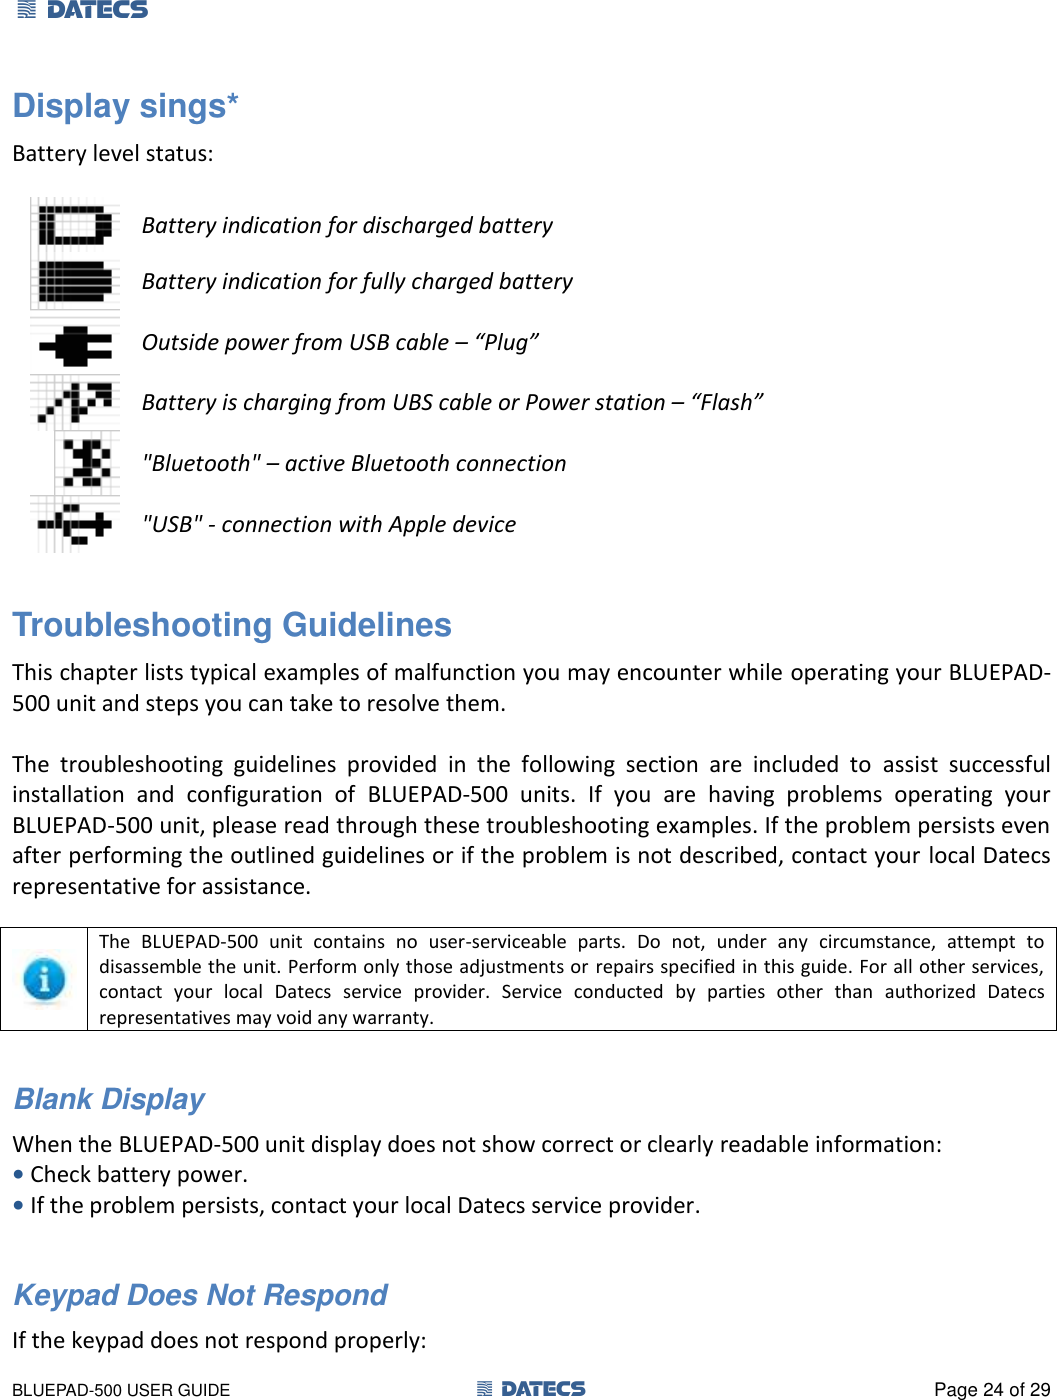 1 DATECS       BLUEPAD-500 USER GUIDE  1 DATECS  Page 24 of 29 Display sings* Battery level status:   Battery indication for discharged battery  Battery indication for fully charged battery  Outside power from USB cable – “Plug”  Battery is charging from UBS cable or Power station – “Flash”  &quot;Bluetooth&quot; – active Bluetooth connection  &quot;USB&quot; - connection with Apple device  Troubleshooting Guidelines This chapter lists typical examples of malfunction you may encounter while operating your BLUEPAD-500 unit and steps you can take to resolve them.  The  troubleshooting  guidelines  provided  in  the  following  section  are  included  to  assist  successful installation  and  configuration  of  BLUEPAD-500  units.  If  you  are  having  problems  operating  your BLUEPAD-500 unit, please read through these troubleshooting examples. If the problem persists even after performing the outlined guidelines or if the problem is not described, contact your local Datecs representative for assistance.   The  BLUEPAD-500  unit  contains  no  user-serviceable  parts.  Do  not,  under  any  circumstance,  attempt  to disassemble the unit. Perform only those adjustments or repairs specified in this guide. For all other services, contact  your  local  Datecs  service  provider.  Service  conducted  by  parties  other  than  authorized  Datecs representatives may void any warranty.  Blank Display  When the BLUEPAD-500 unit display does not show correct or clearly readable information: • Check battery power. • If the problem persists, contact your local Datecs service provider.  Keypad Does Not Respond If the keypad does not respond properly: 